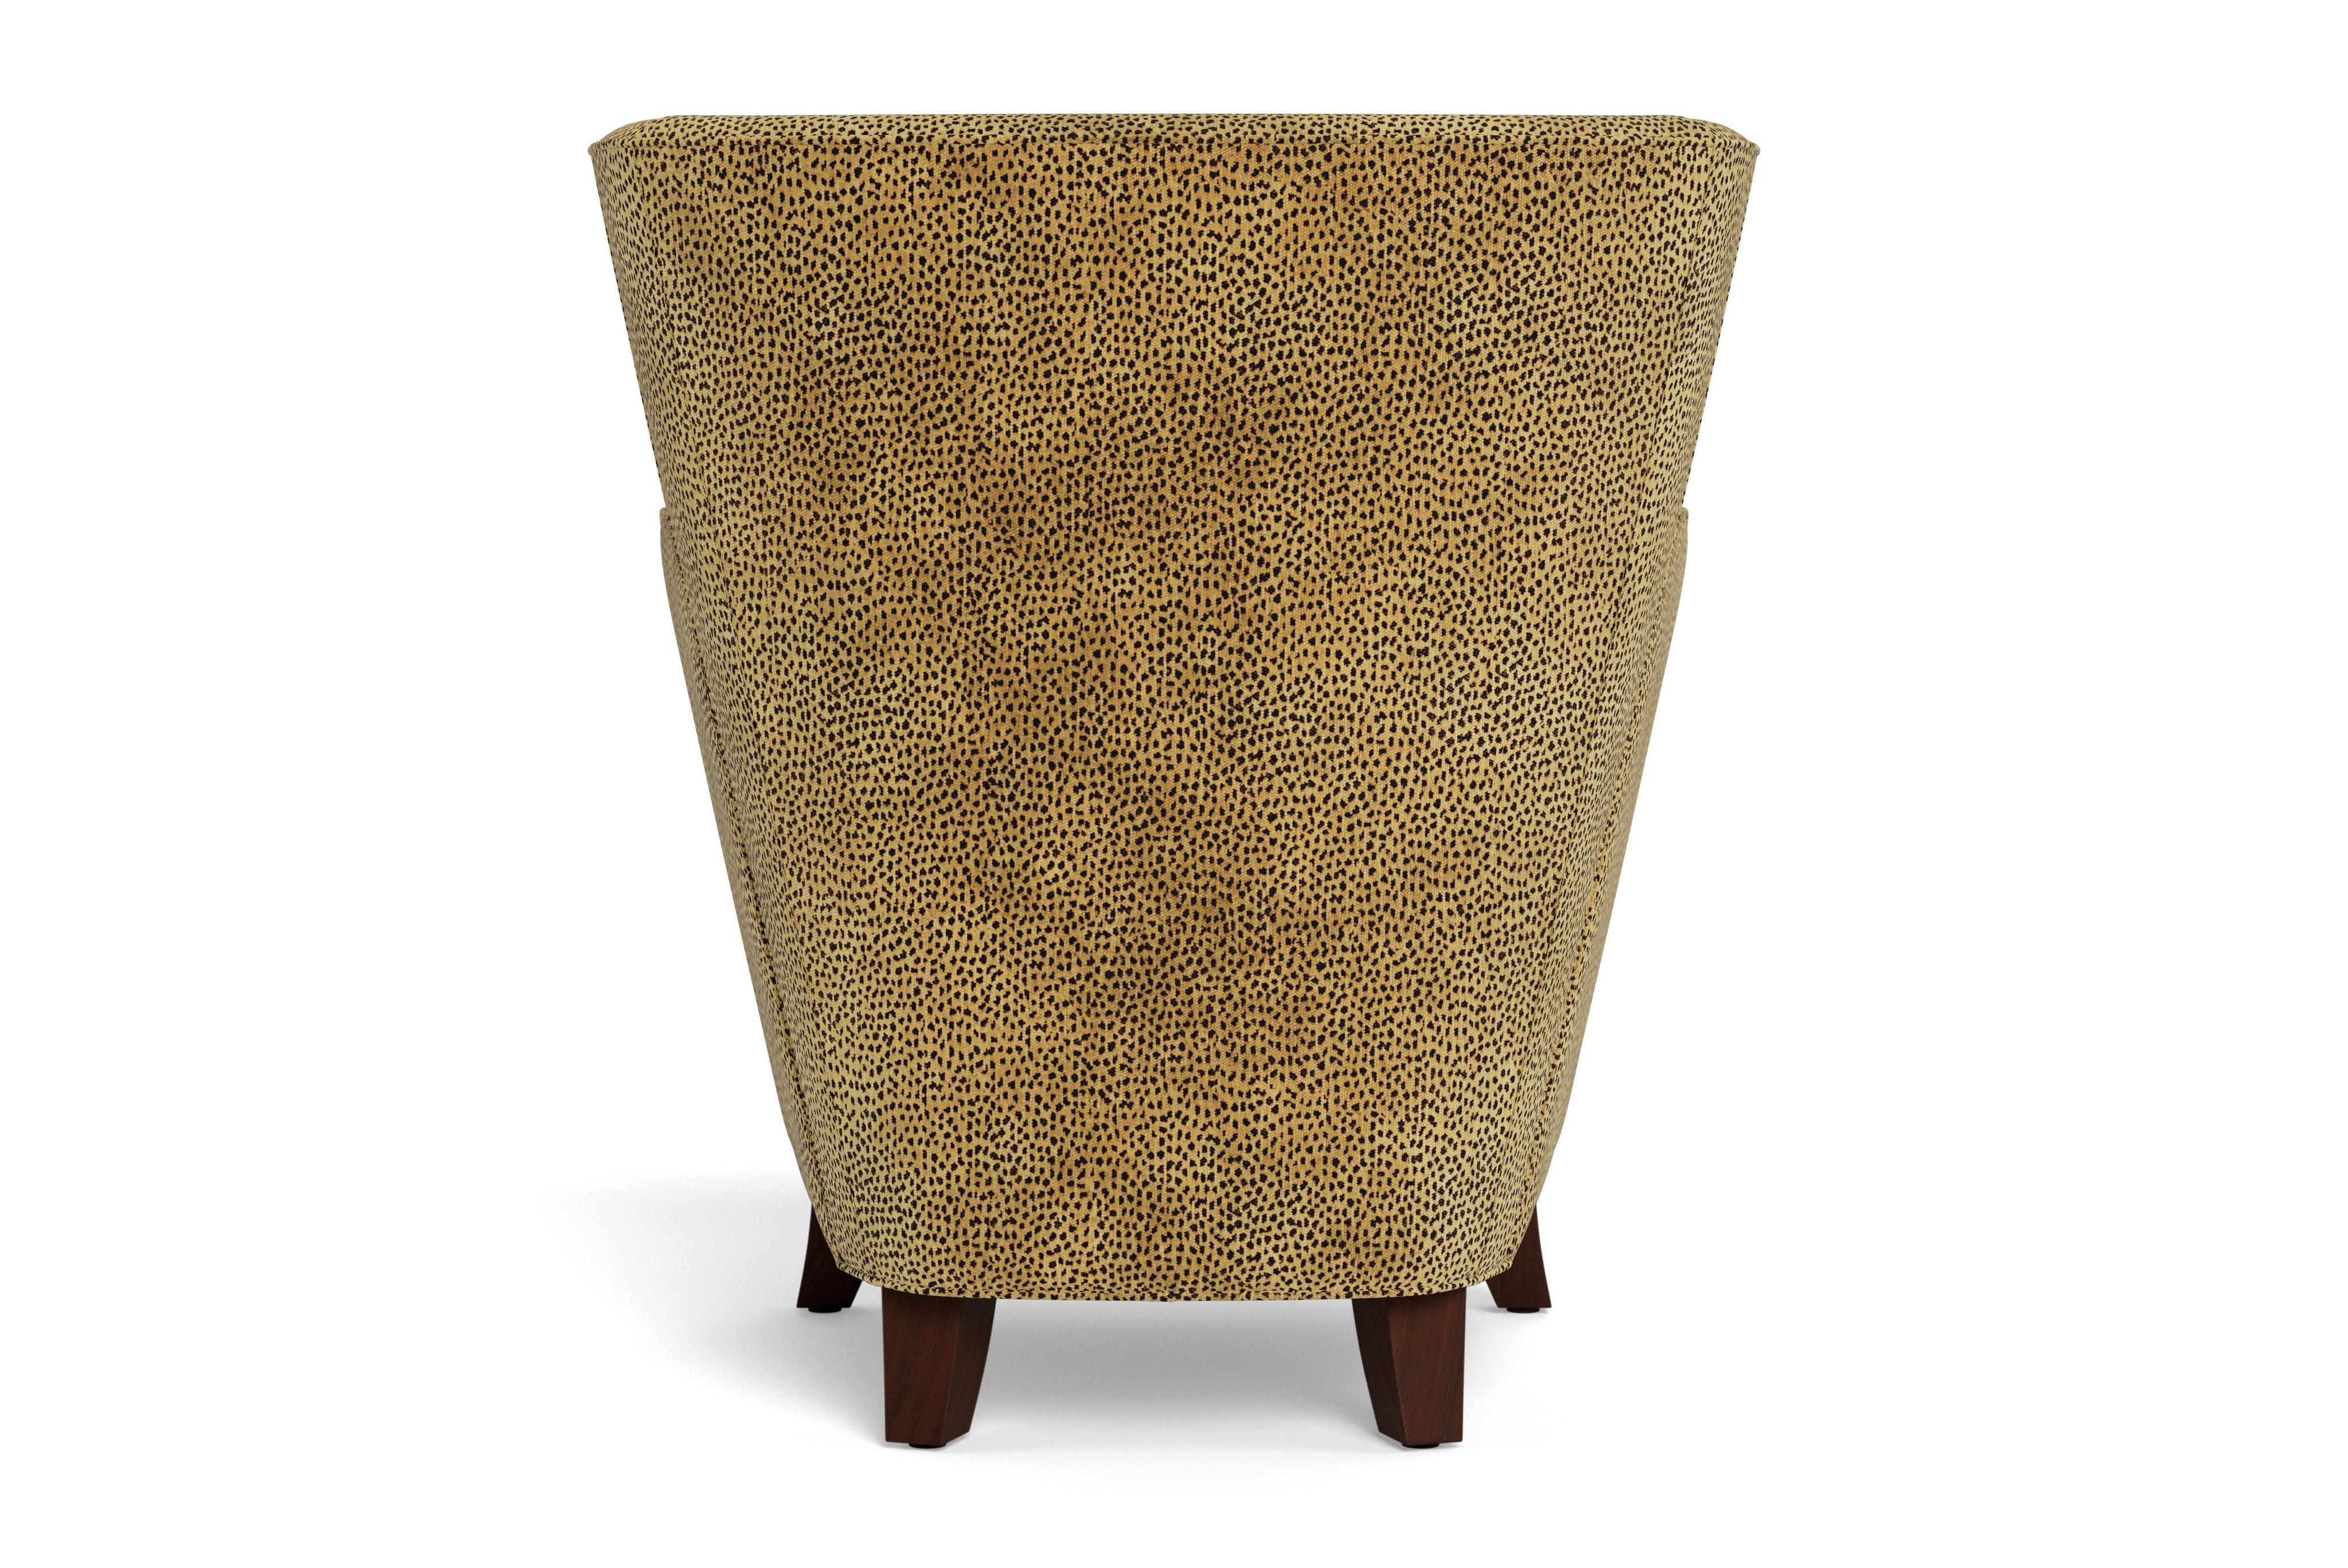 American Bunny Williams Home Bardot Chair, Leopard Chenille/Natural Mahogany For Sale